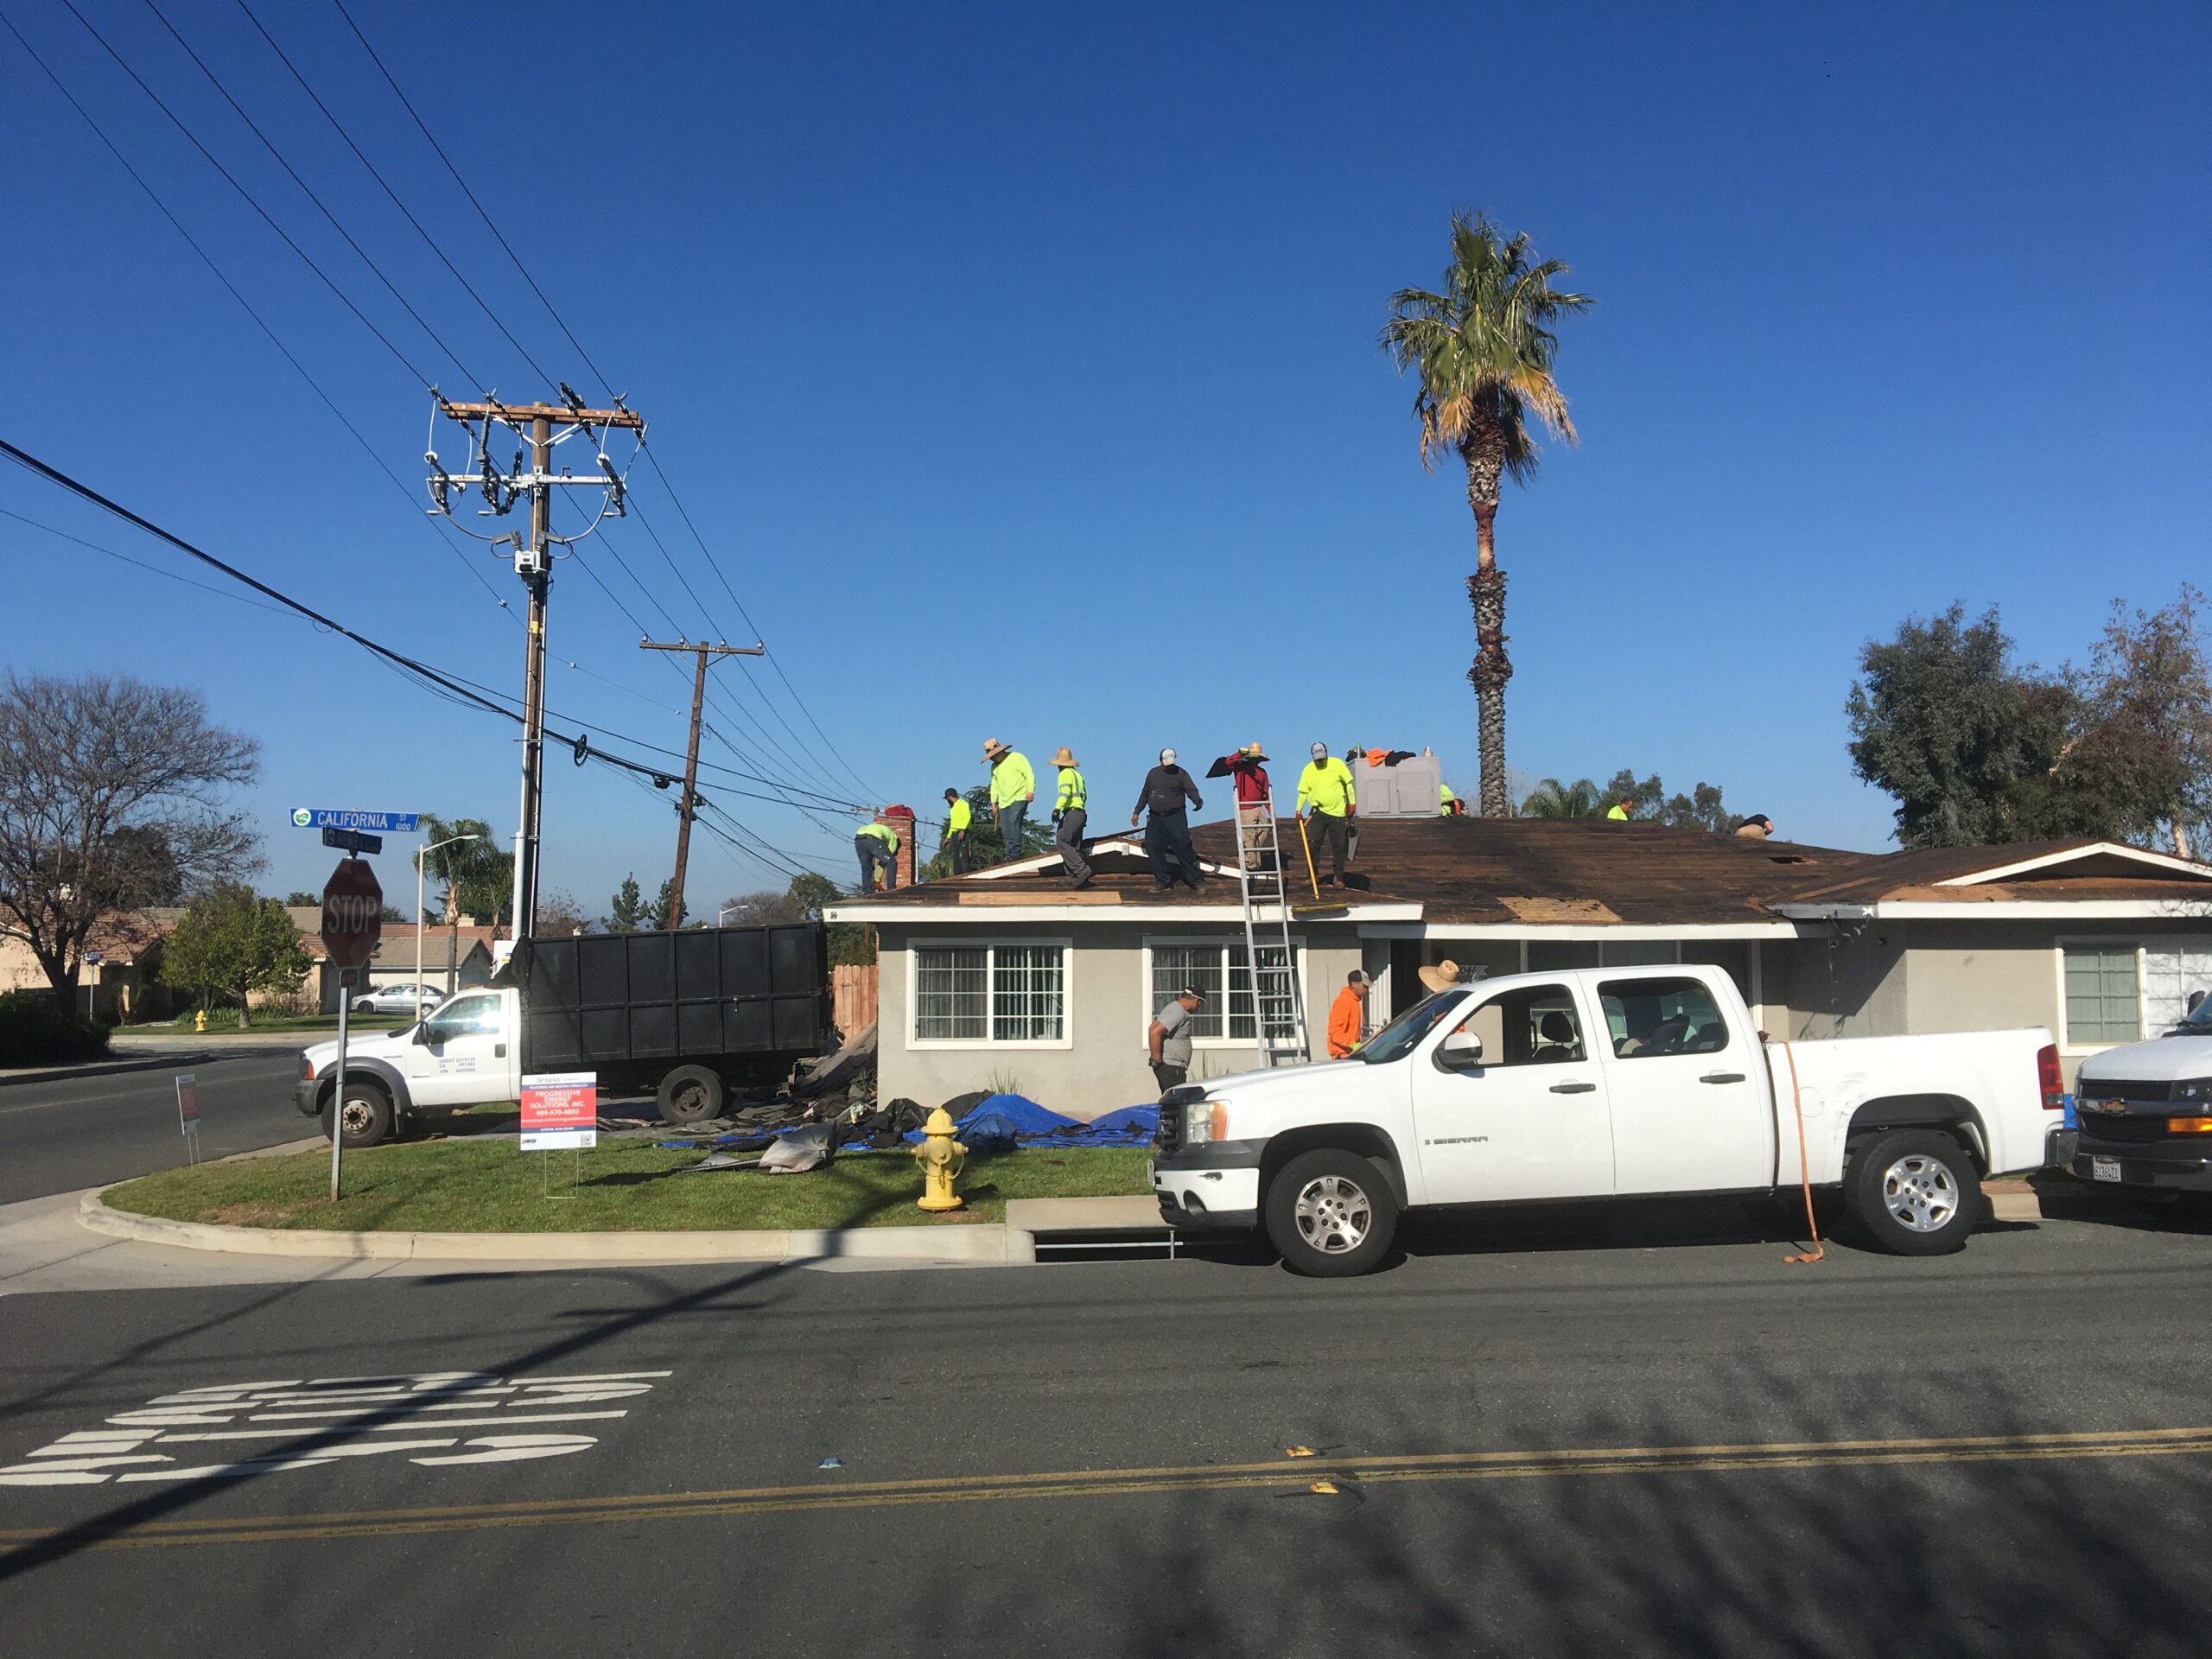 Yucaipa Roofing Installation this image shows step one which is the removal (Tear off) of the old roof. This roofing installation is located in the city of Yucaipa Ca